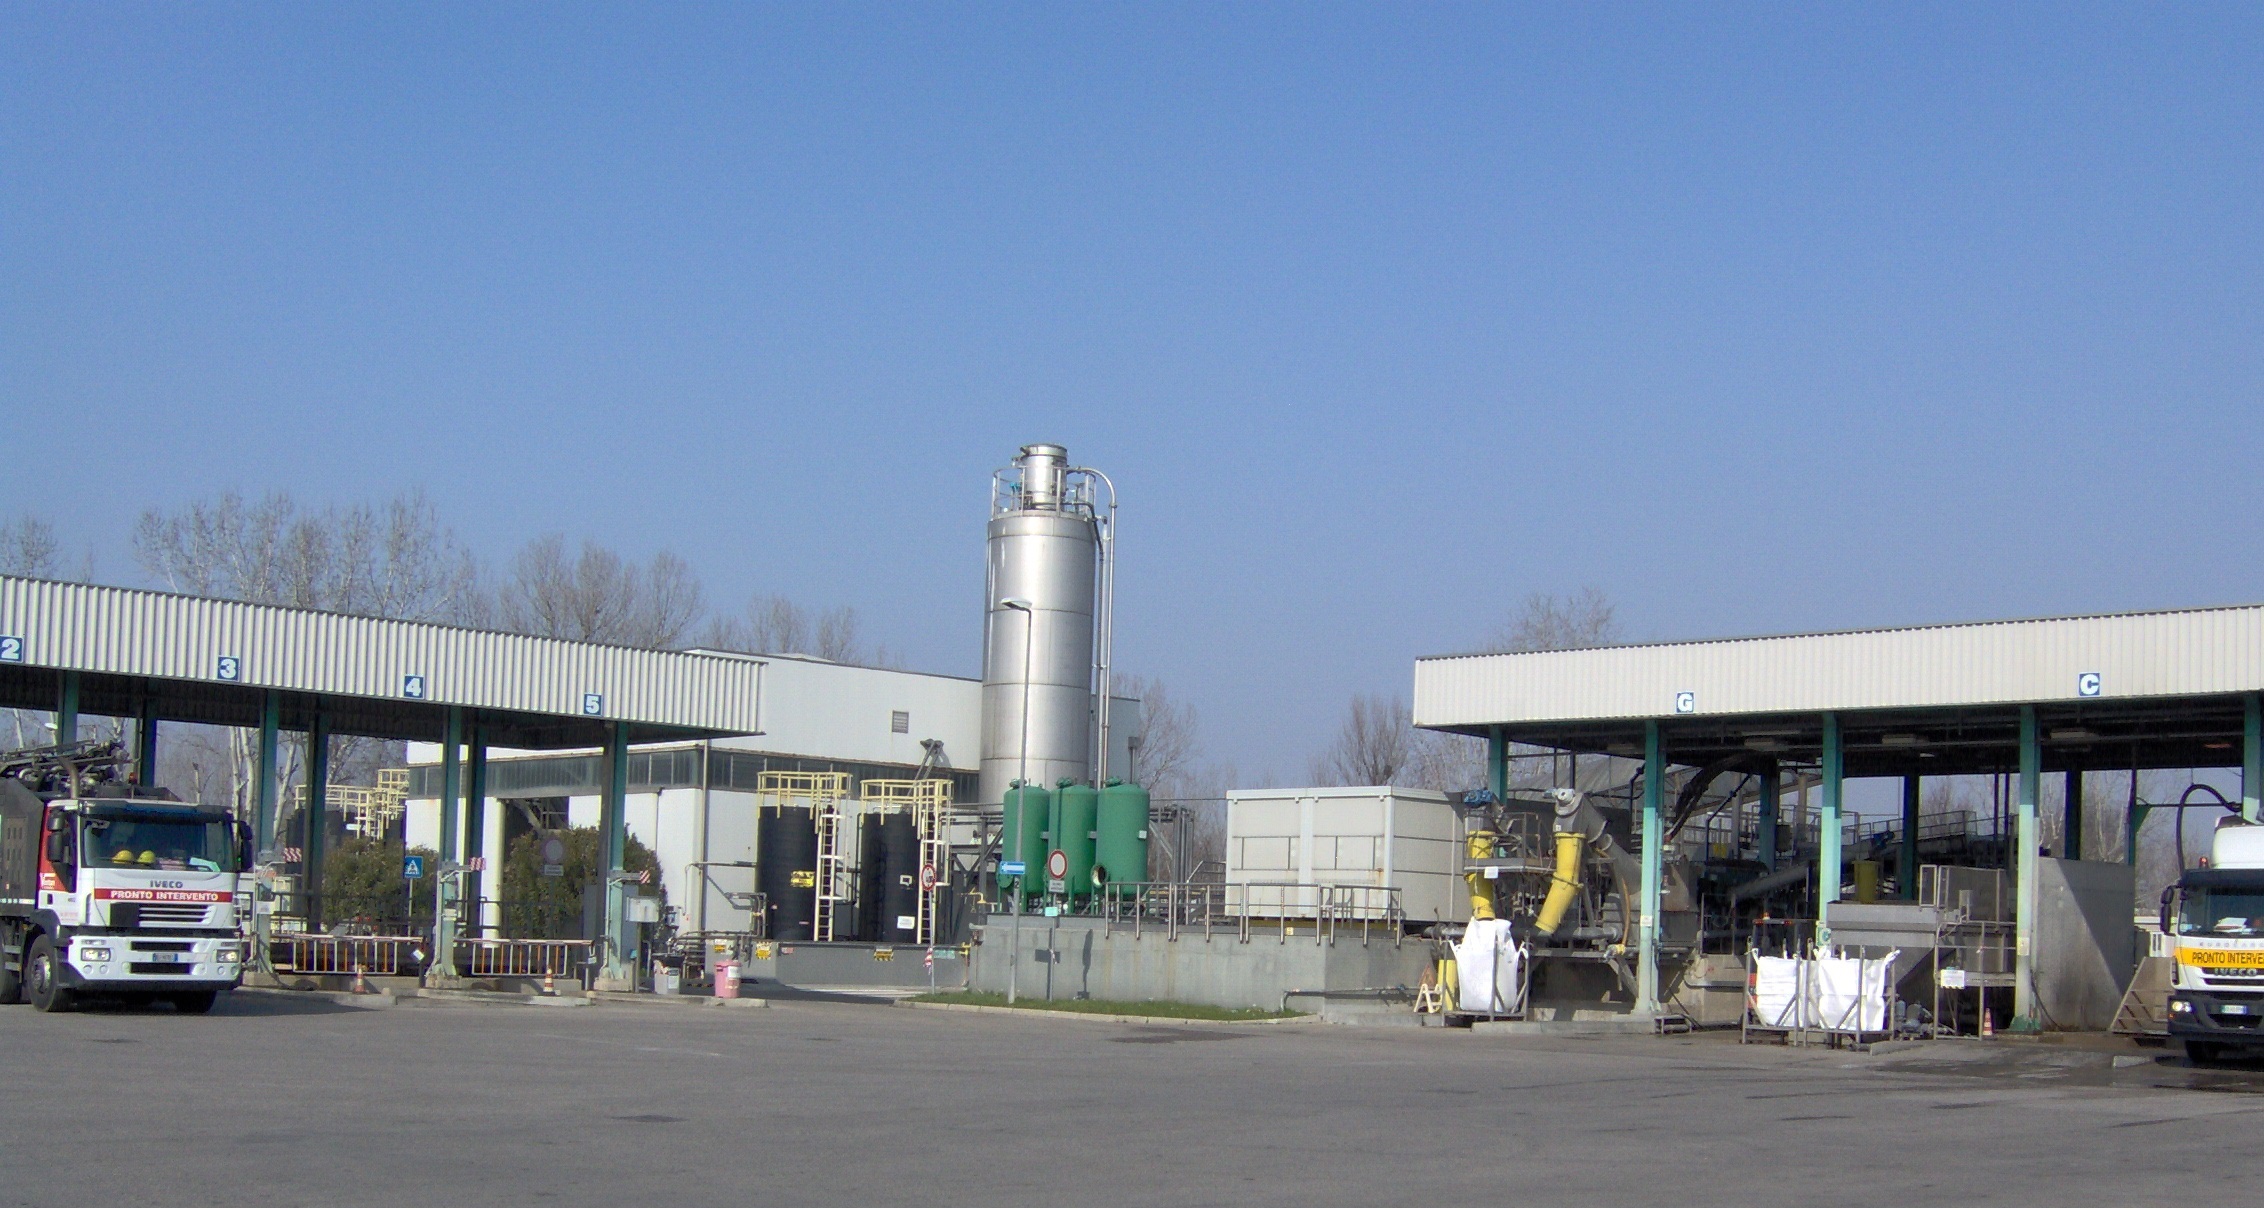 vehicle unloading area of Industrial sludge treatment plant in Bologna